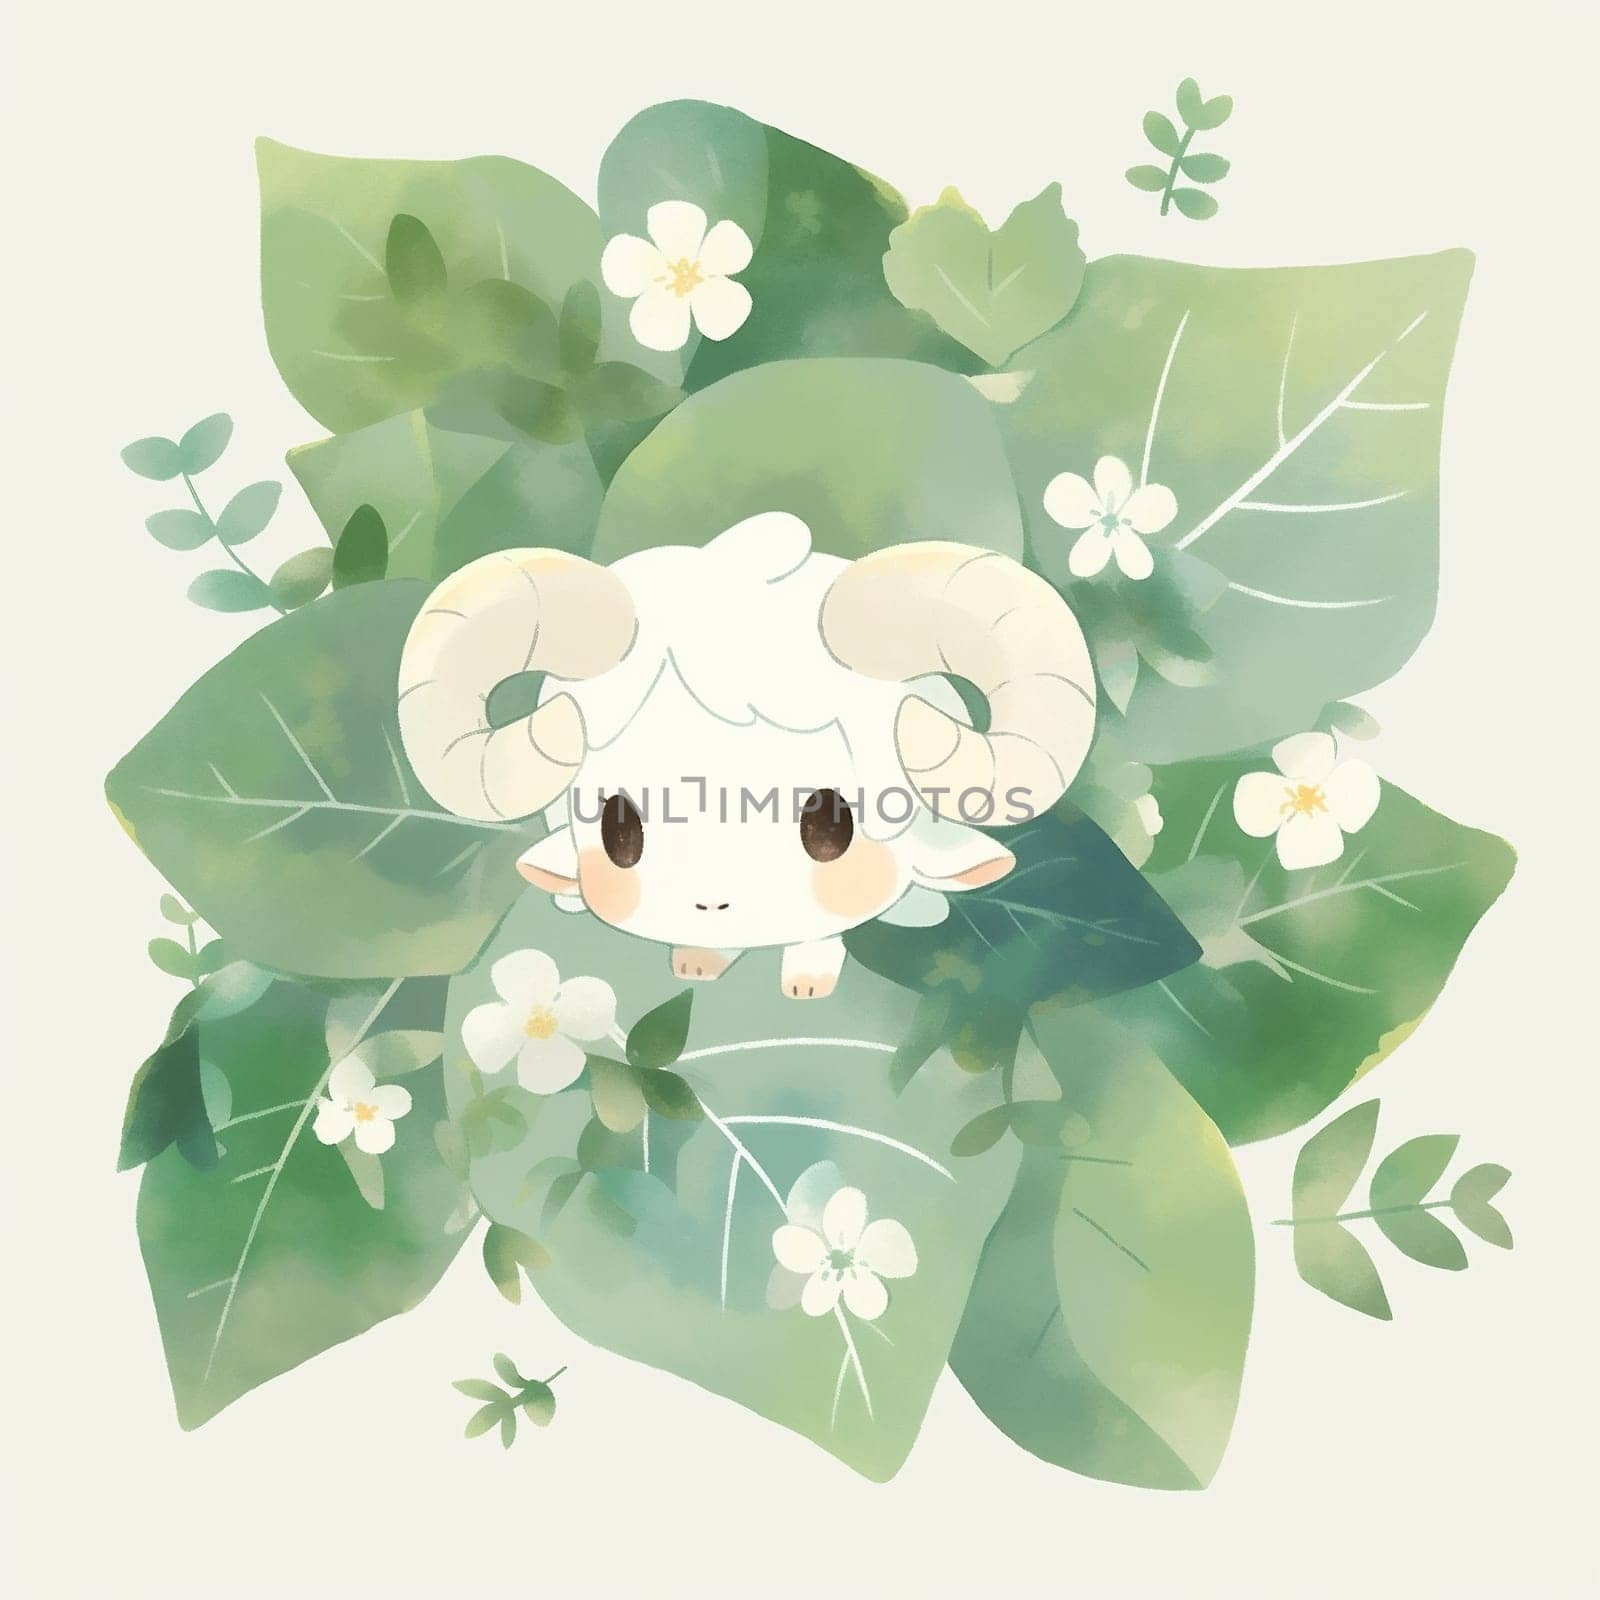 Cute Sheep in Green Tropical Leaves. Illustration of Ram in Pastel Colors. Aries Isolated on White Background.